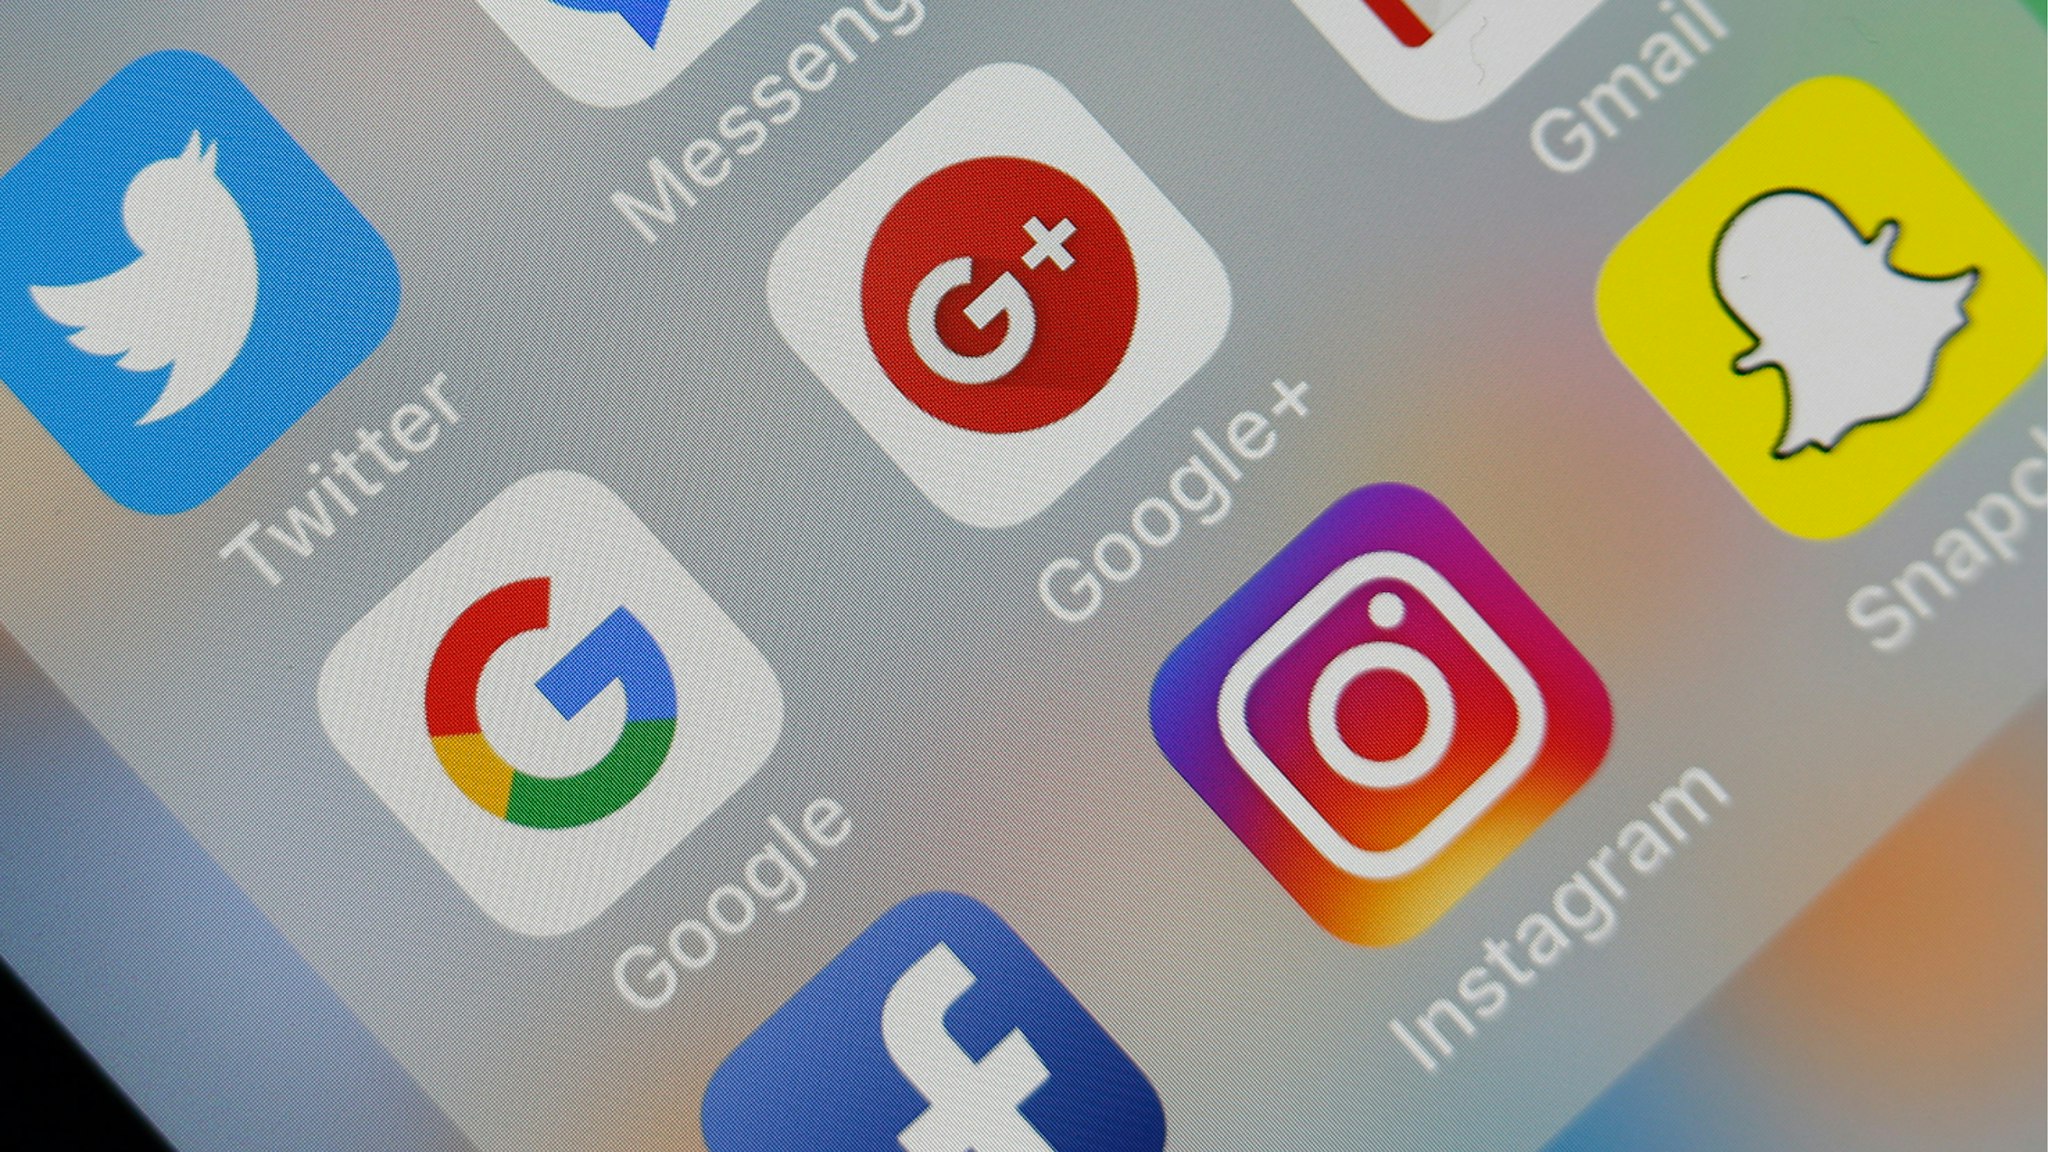 In this photo illustration, the social medias applications logos, Twitter, Google, Google+, Gmail, Facebook, Instagram and Snapchat are displayed on the screen of an Apple iPhone on October 08, 2018 in Paris, France.